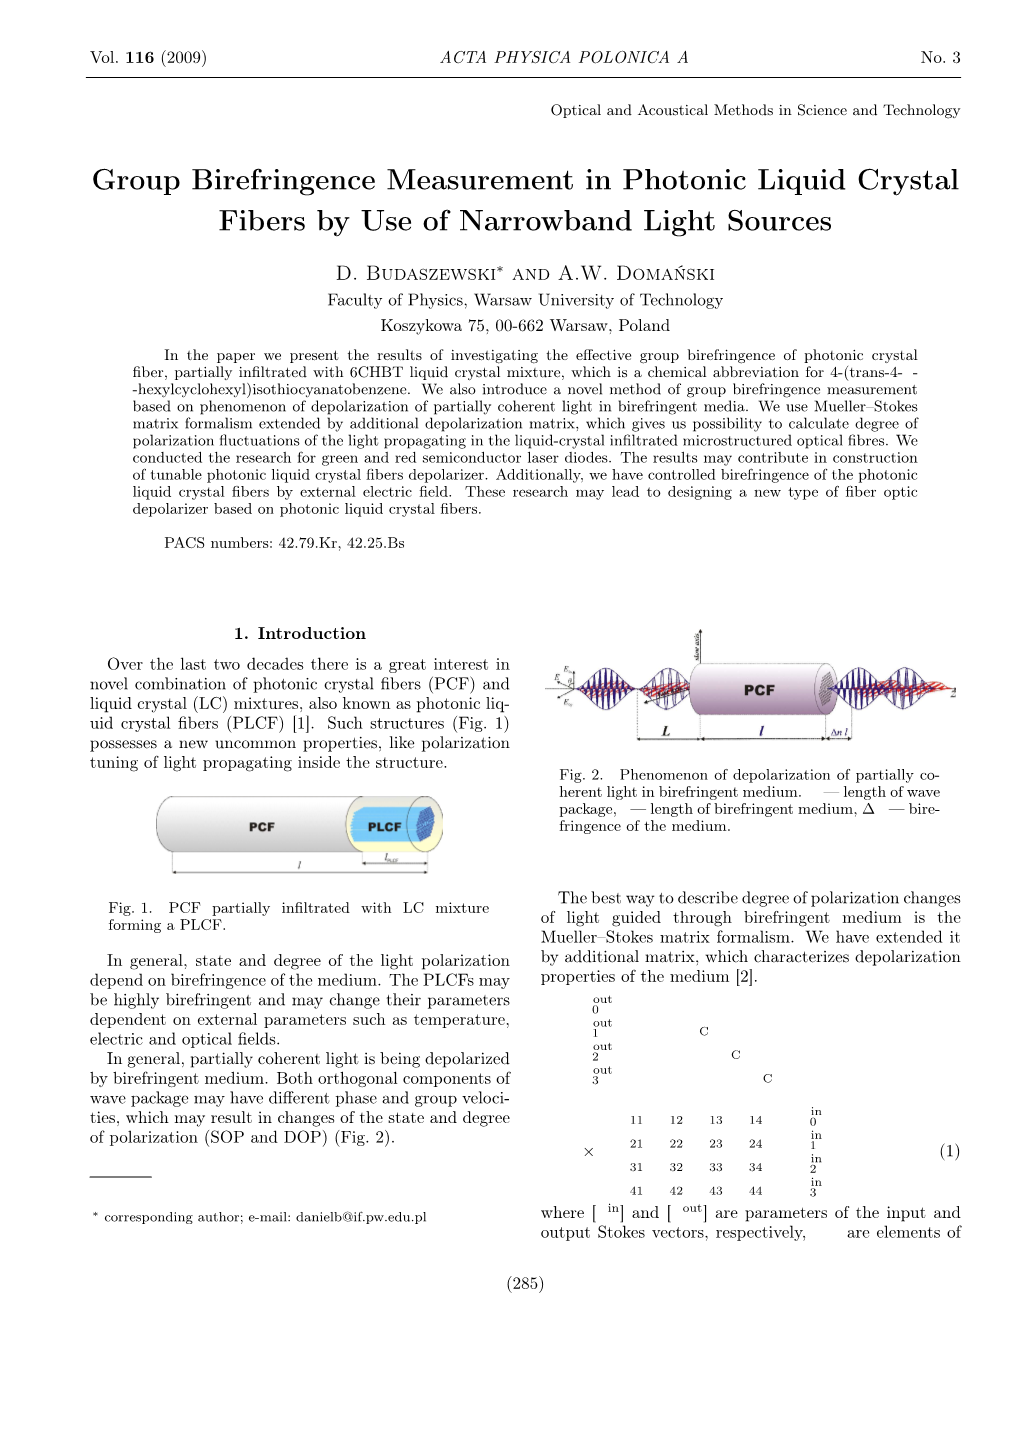 Group Birefringence Measurement in Photonic Liquid Crystal Fibers by Use of Narrowband Light Sources